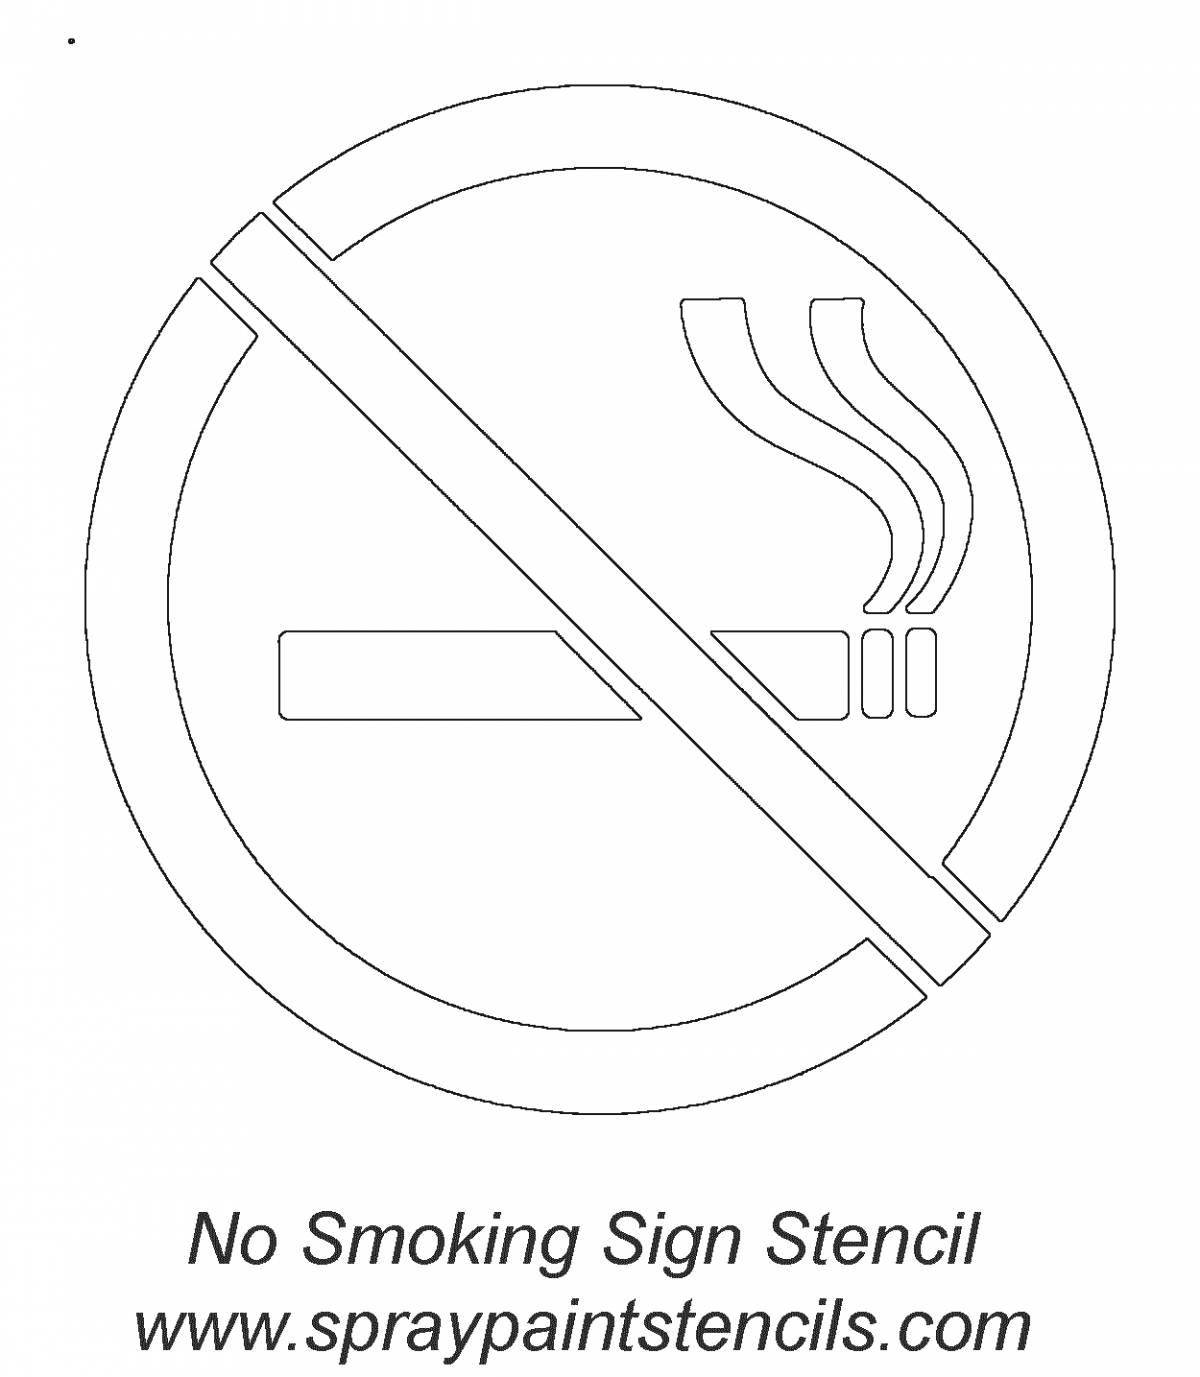 Coloring page friendly safety sign